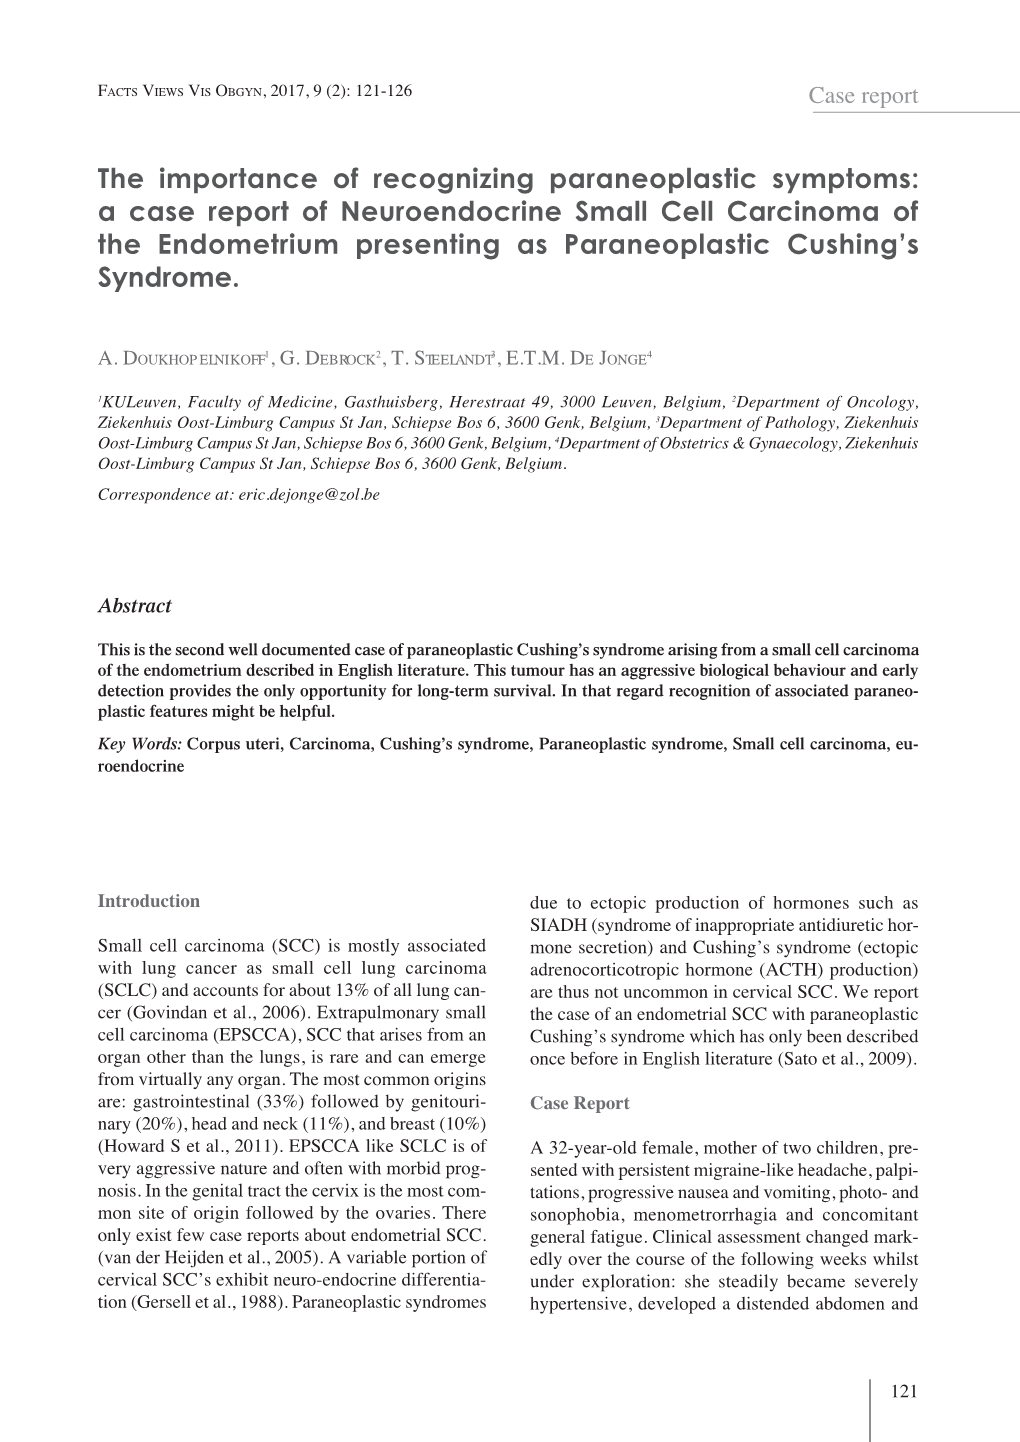 The Importance of Recognizing Paraneoplastic Symptoms: a Case Report of Neuroendocrine Small Cell Carcinoma of the Endometrium P